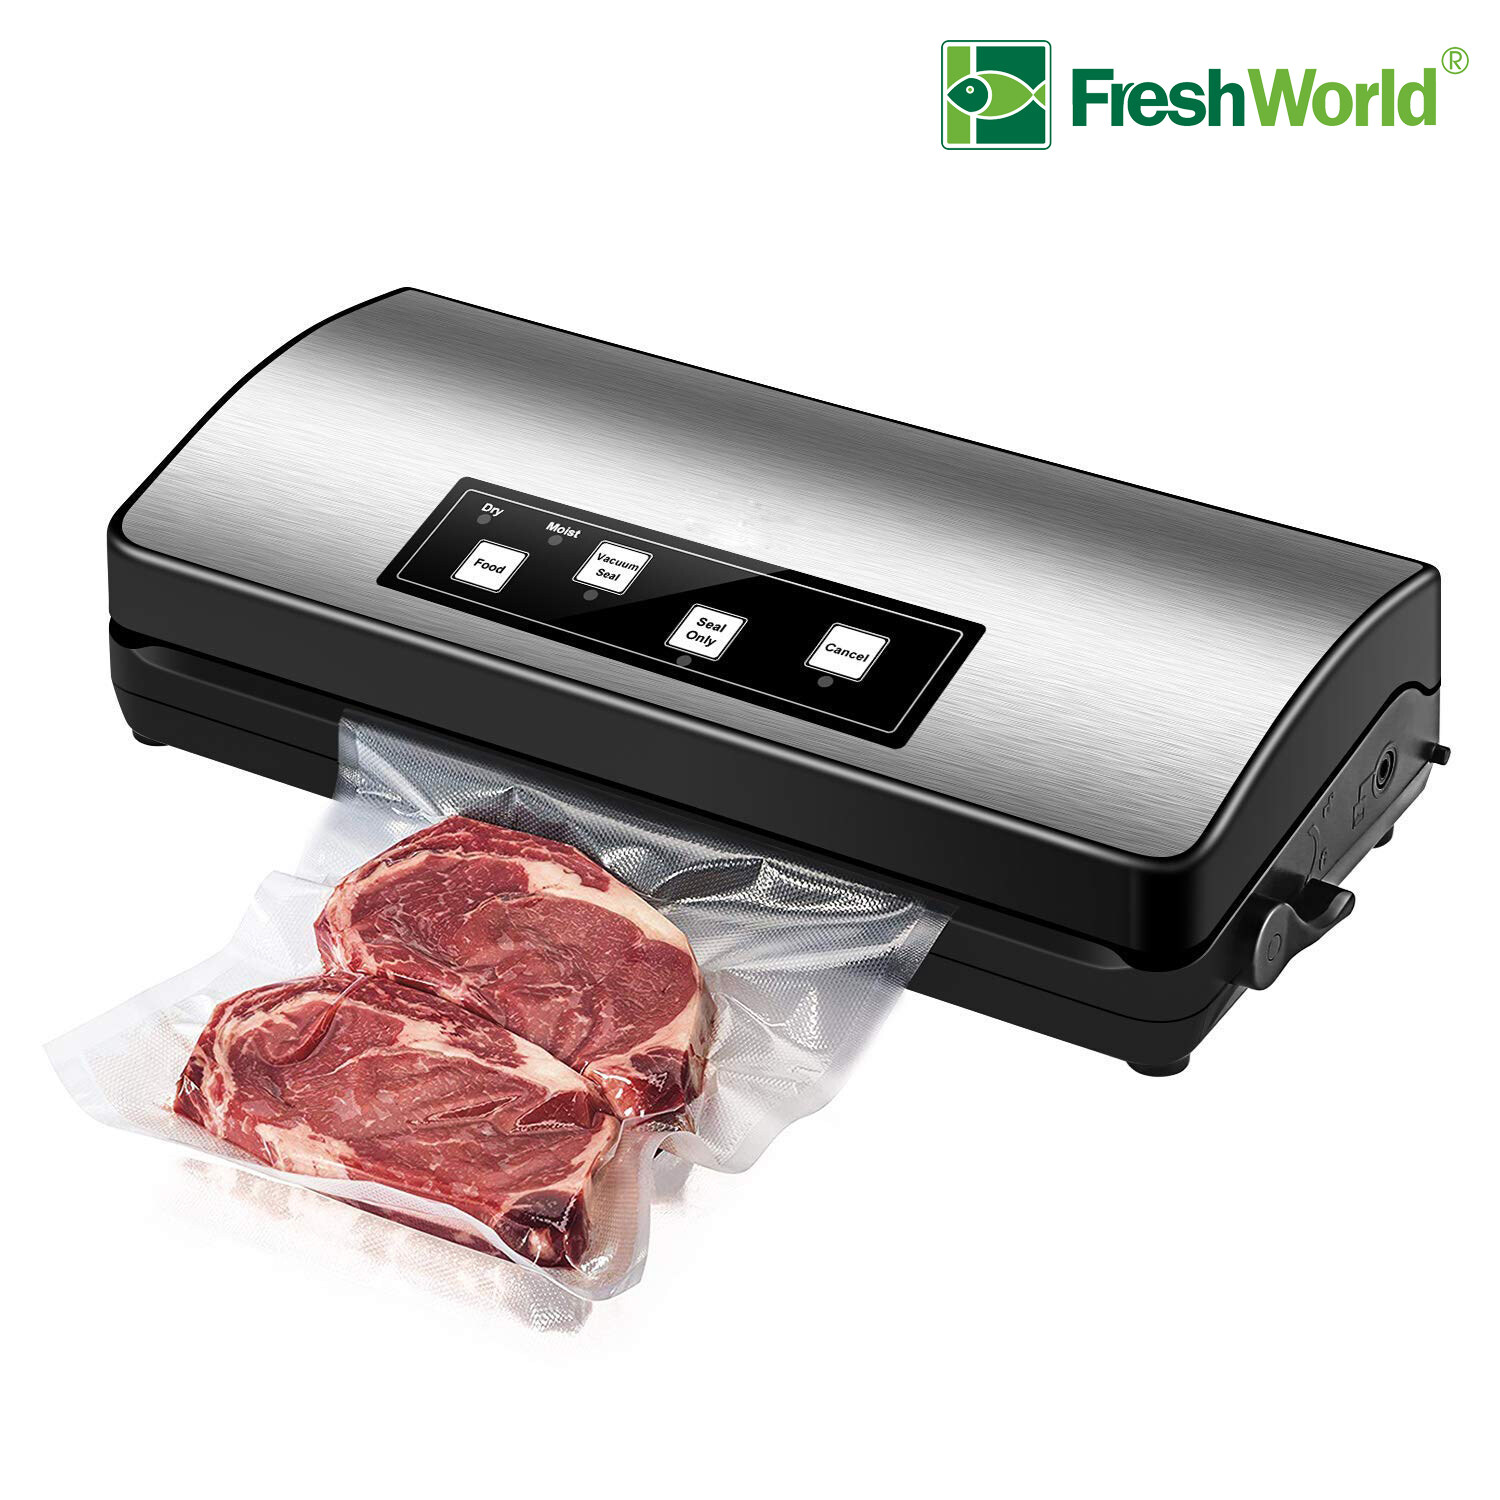 The Ultimate Guide to Using a Vacuum Sealer for Freezing Food